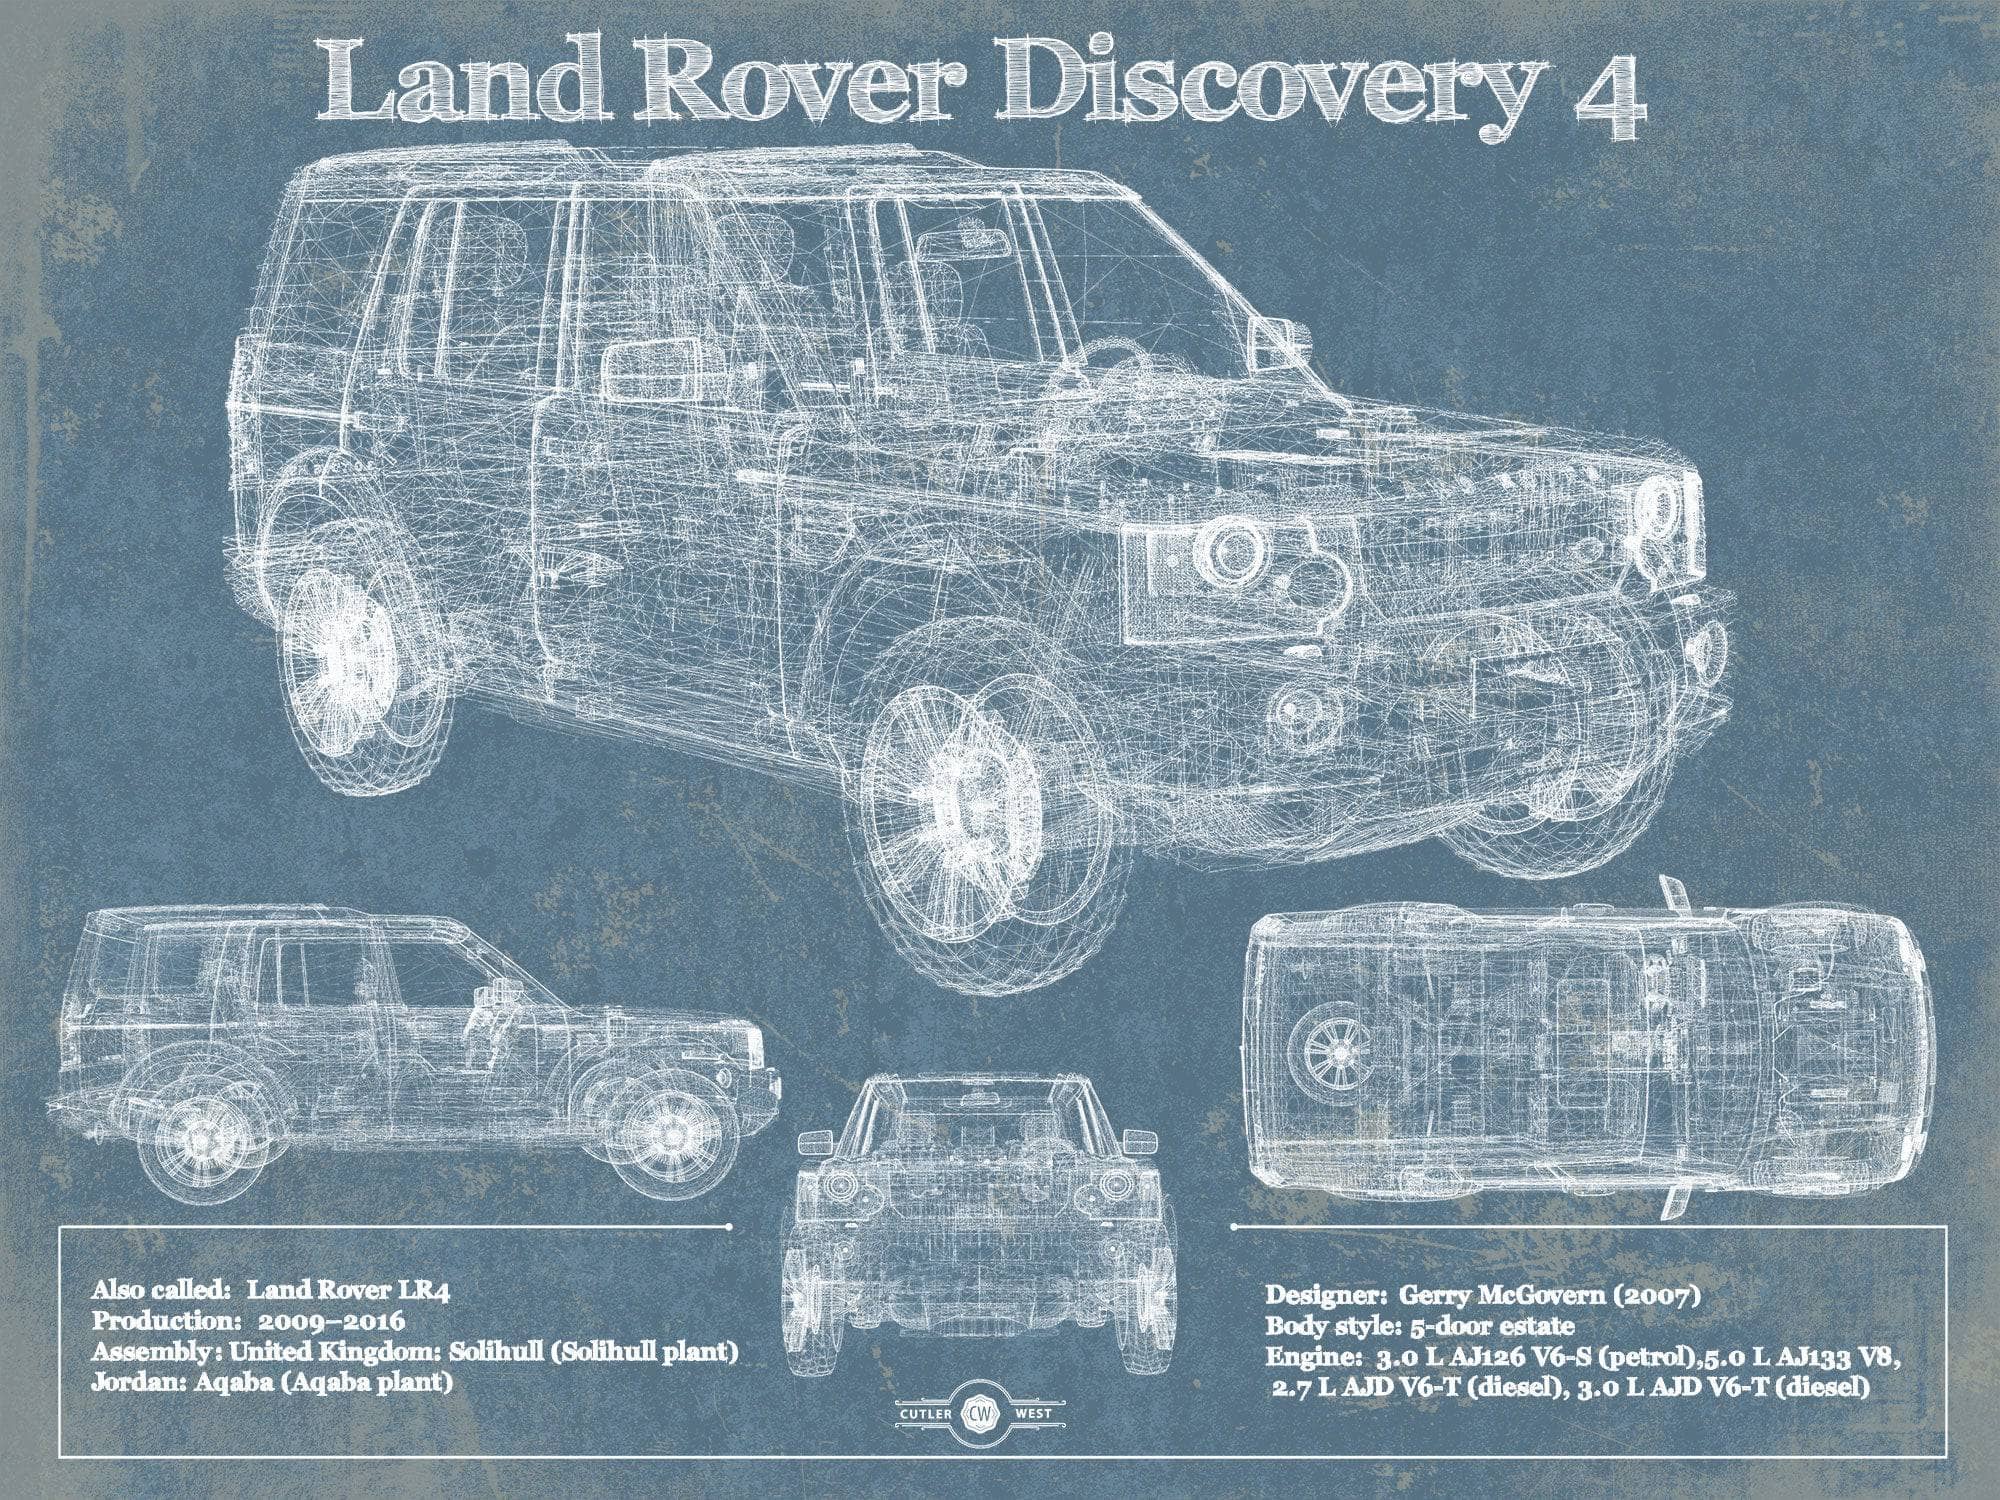 Cutler West Land Rover Collection 14" x 11" / Unframed Land Rover Discovery 4 Blueprint Vintage Auto Patent Print 906705570